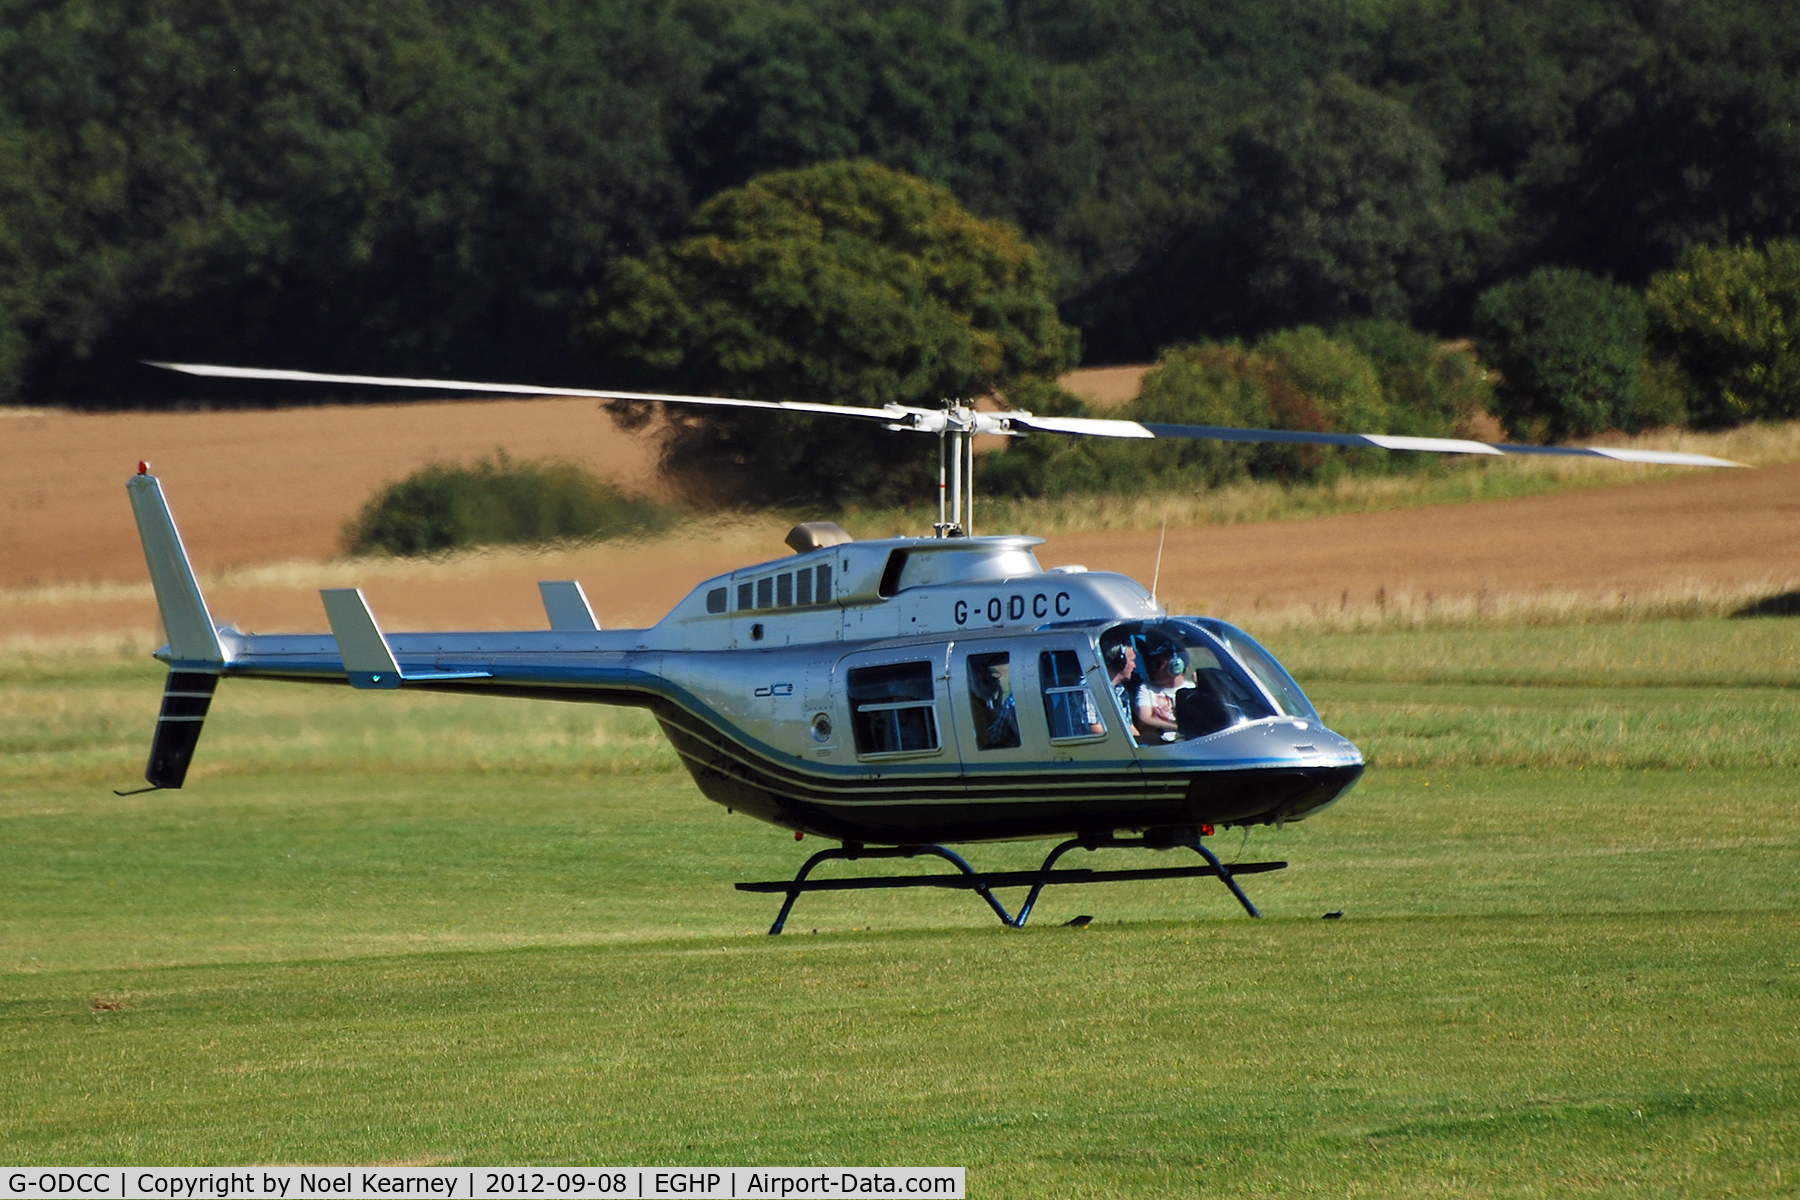 G-ODCC, 1983 Bell 206L-3 LongRanger III C/N 51070, Photographed at the Vintage Fly-in at Popham Airfield Sept '12